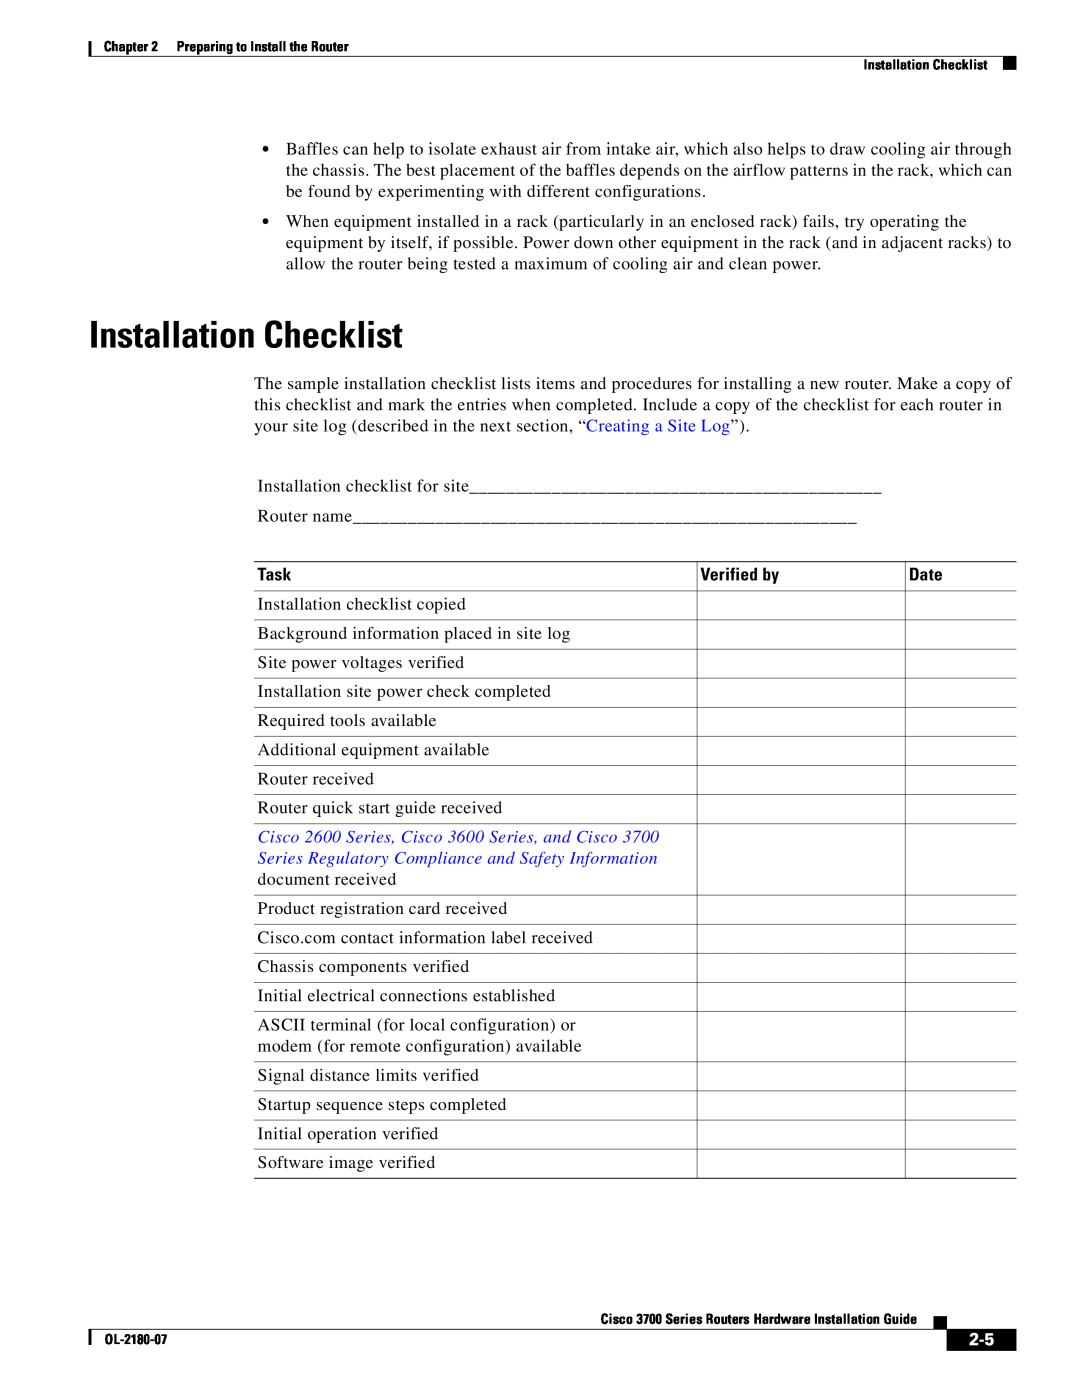 Cisco Systems 3700 Series manual Installation Checklist, Task, Verified by, Date 